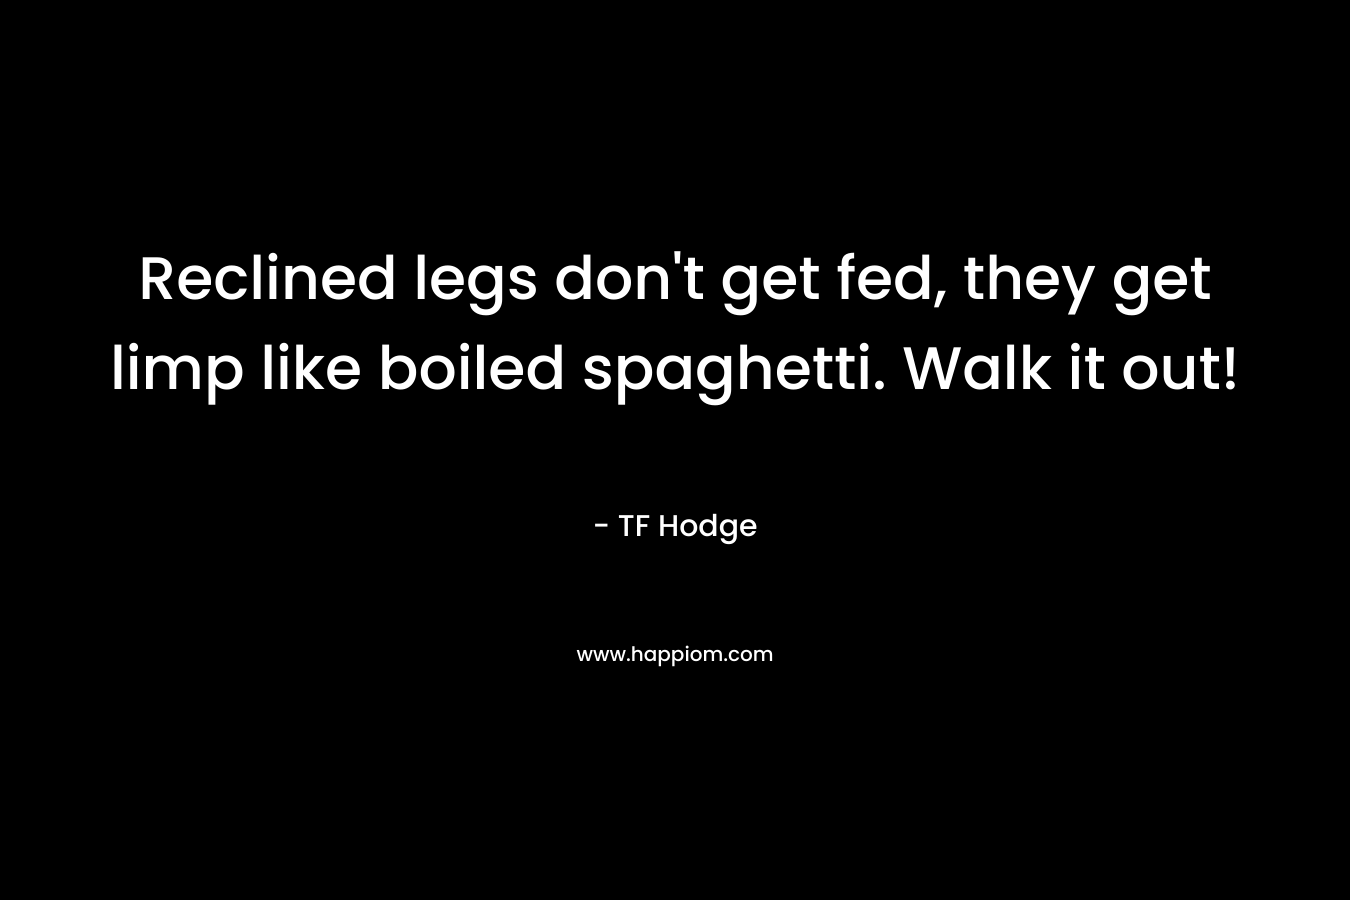 Reclined legs don't get fed, they get limp like boiled spaghetti. Walk it out!